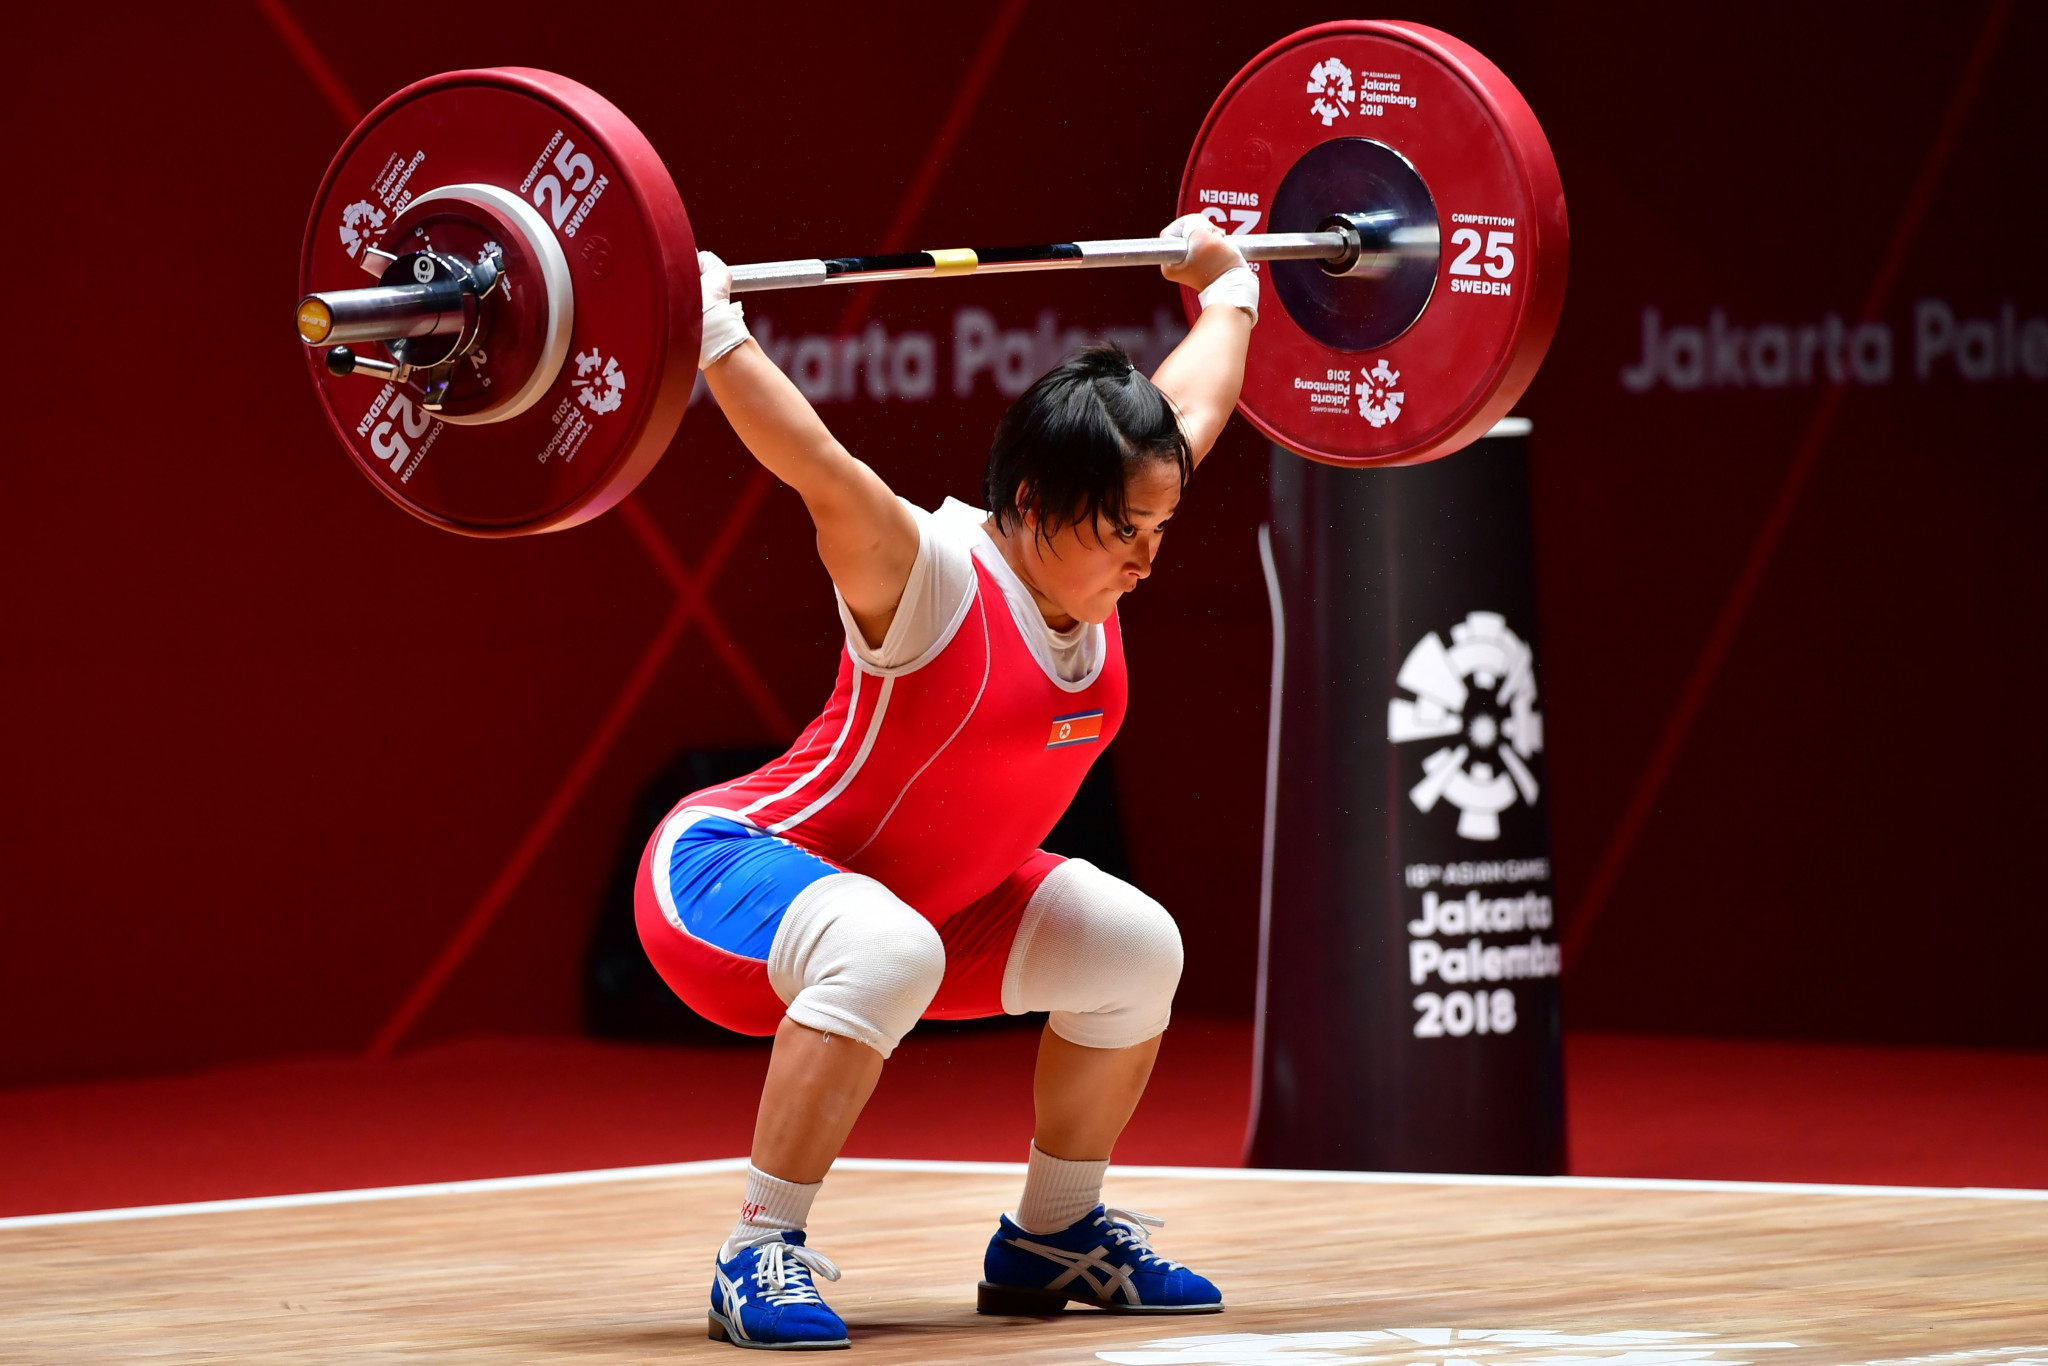 USA Weightlifting hope to find new Olympic talent through their combine series ©Getty Images